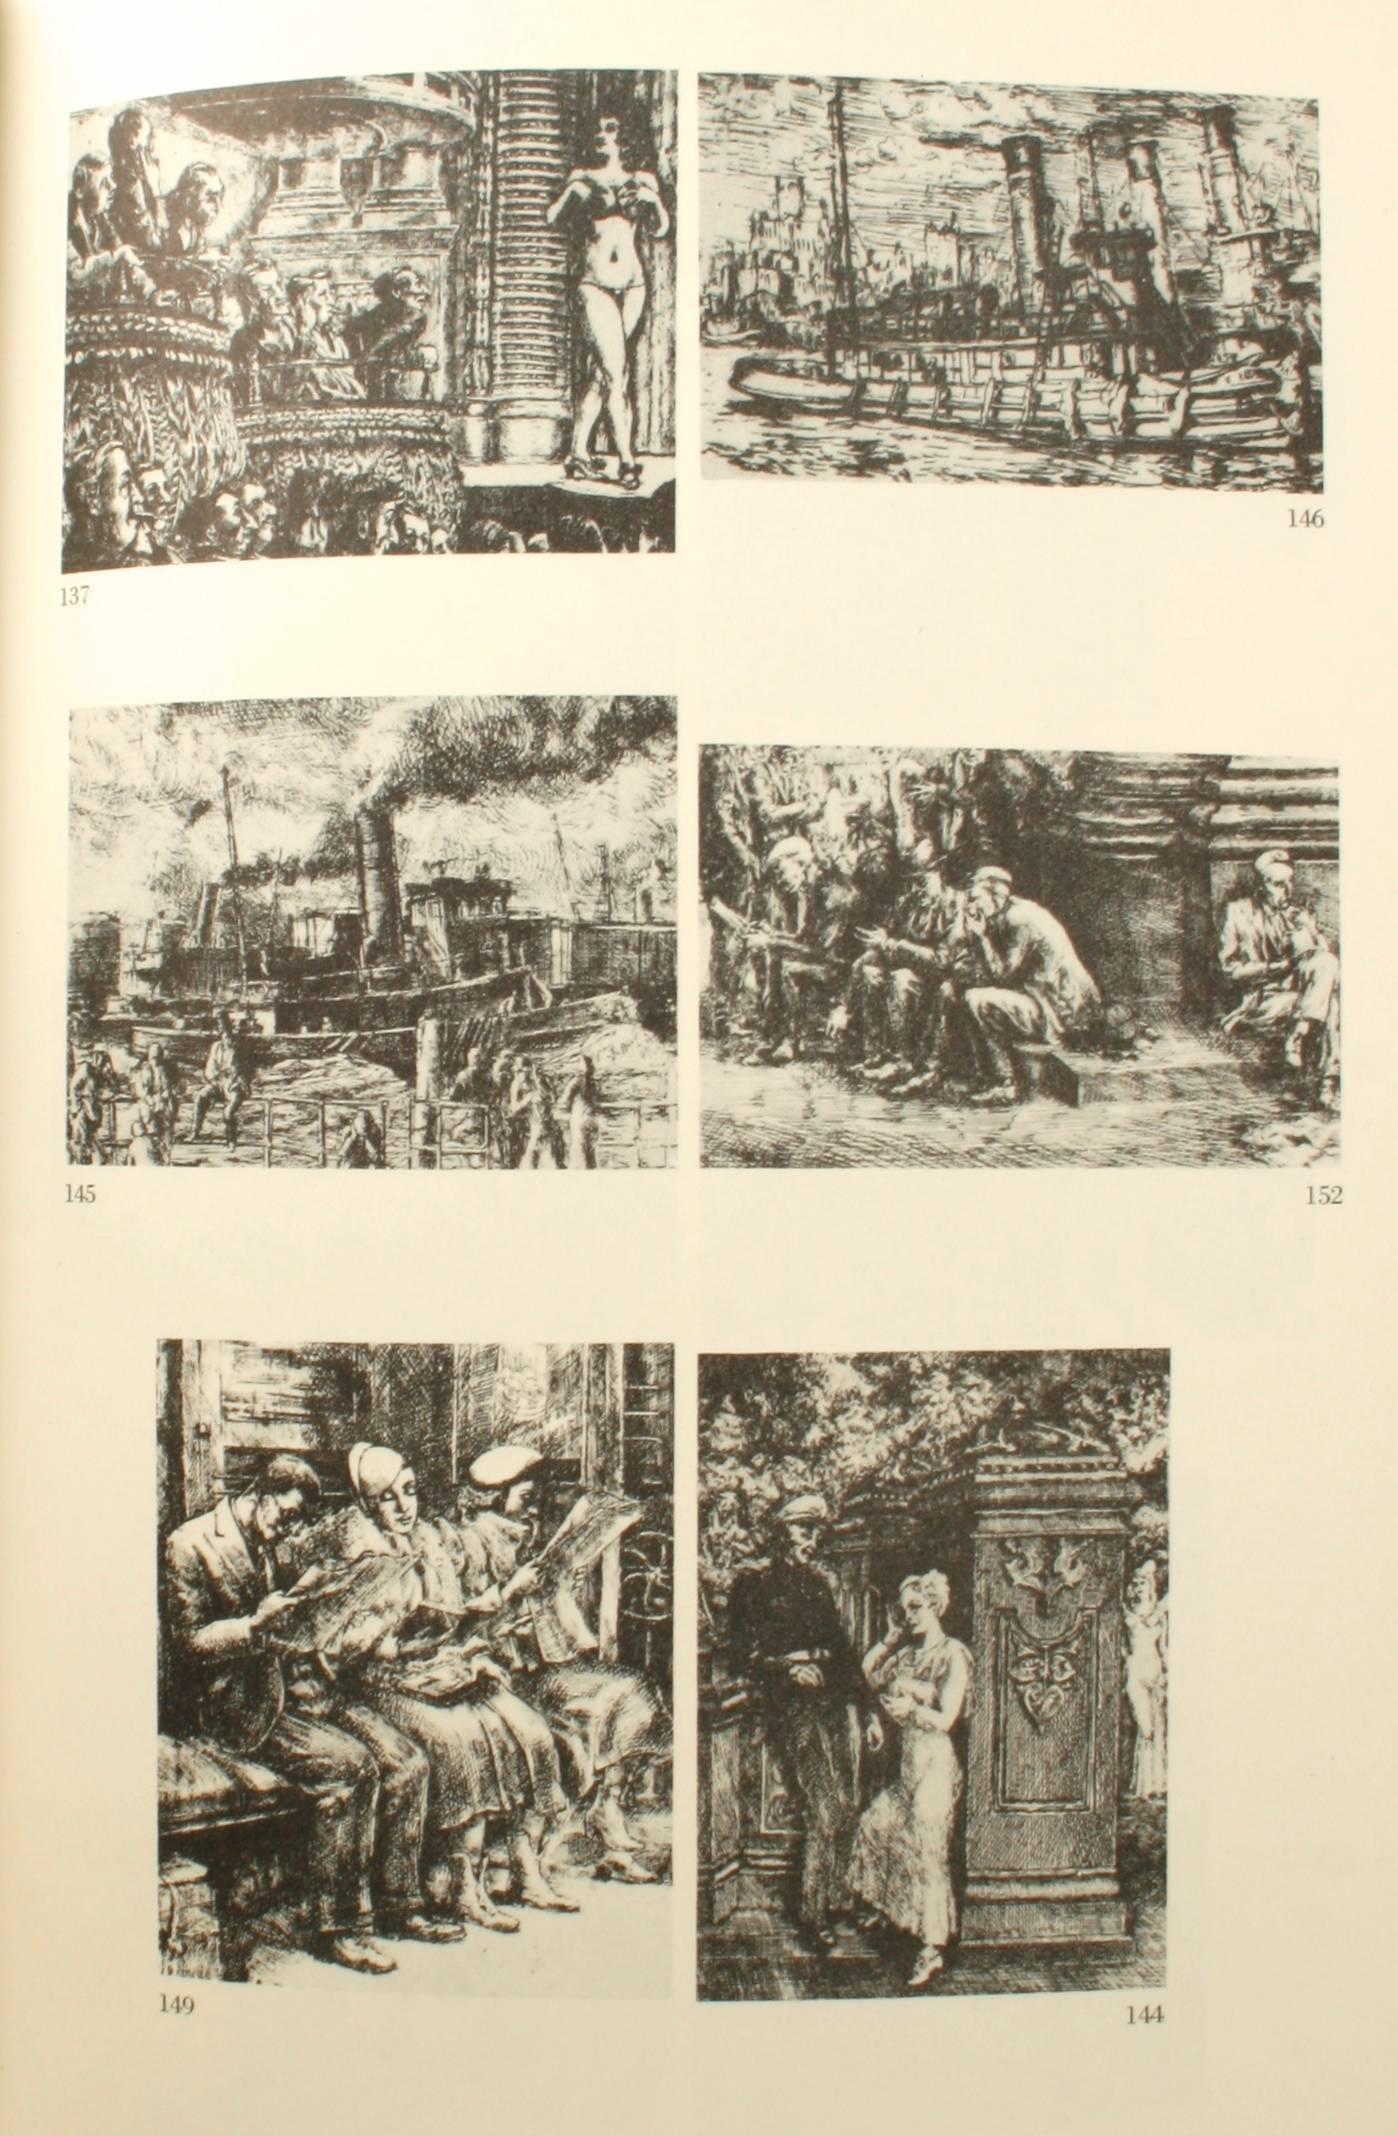 American Reginald Marsh, Etchings, Engravings, Lithographs, First Edition For Sale